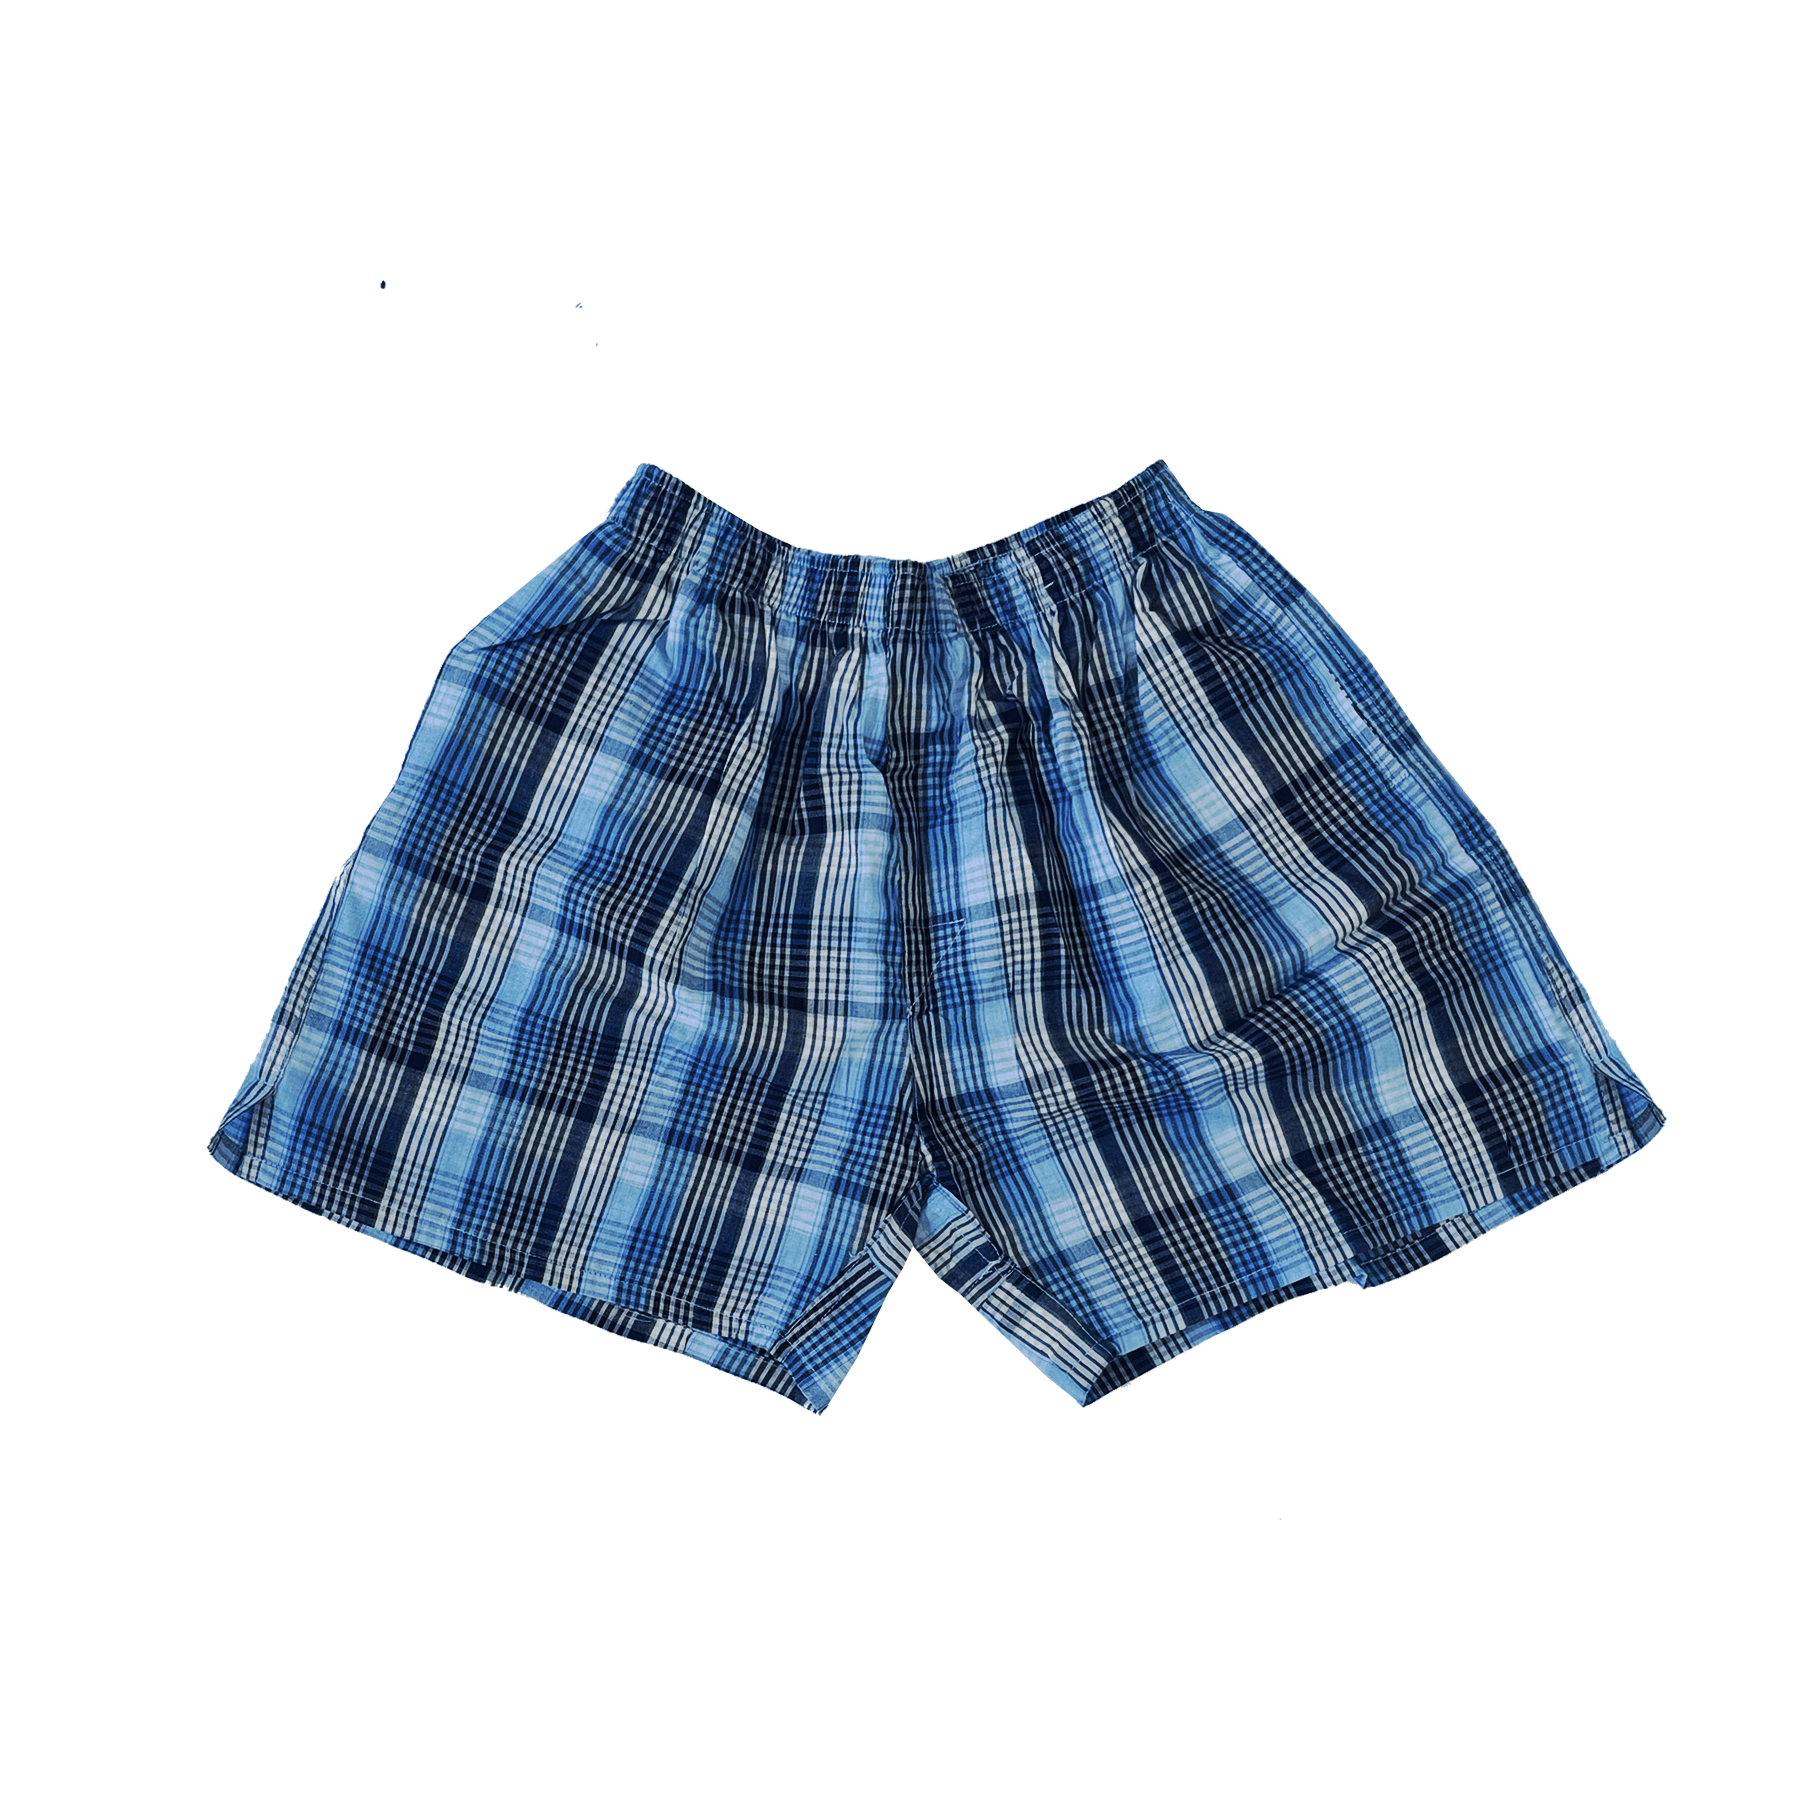 Man Short Pants Quick Dry Cheap Price Oem Each One In Opp Bag Made In Vietnam Manufacturer 3